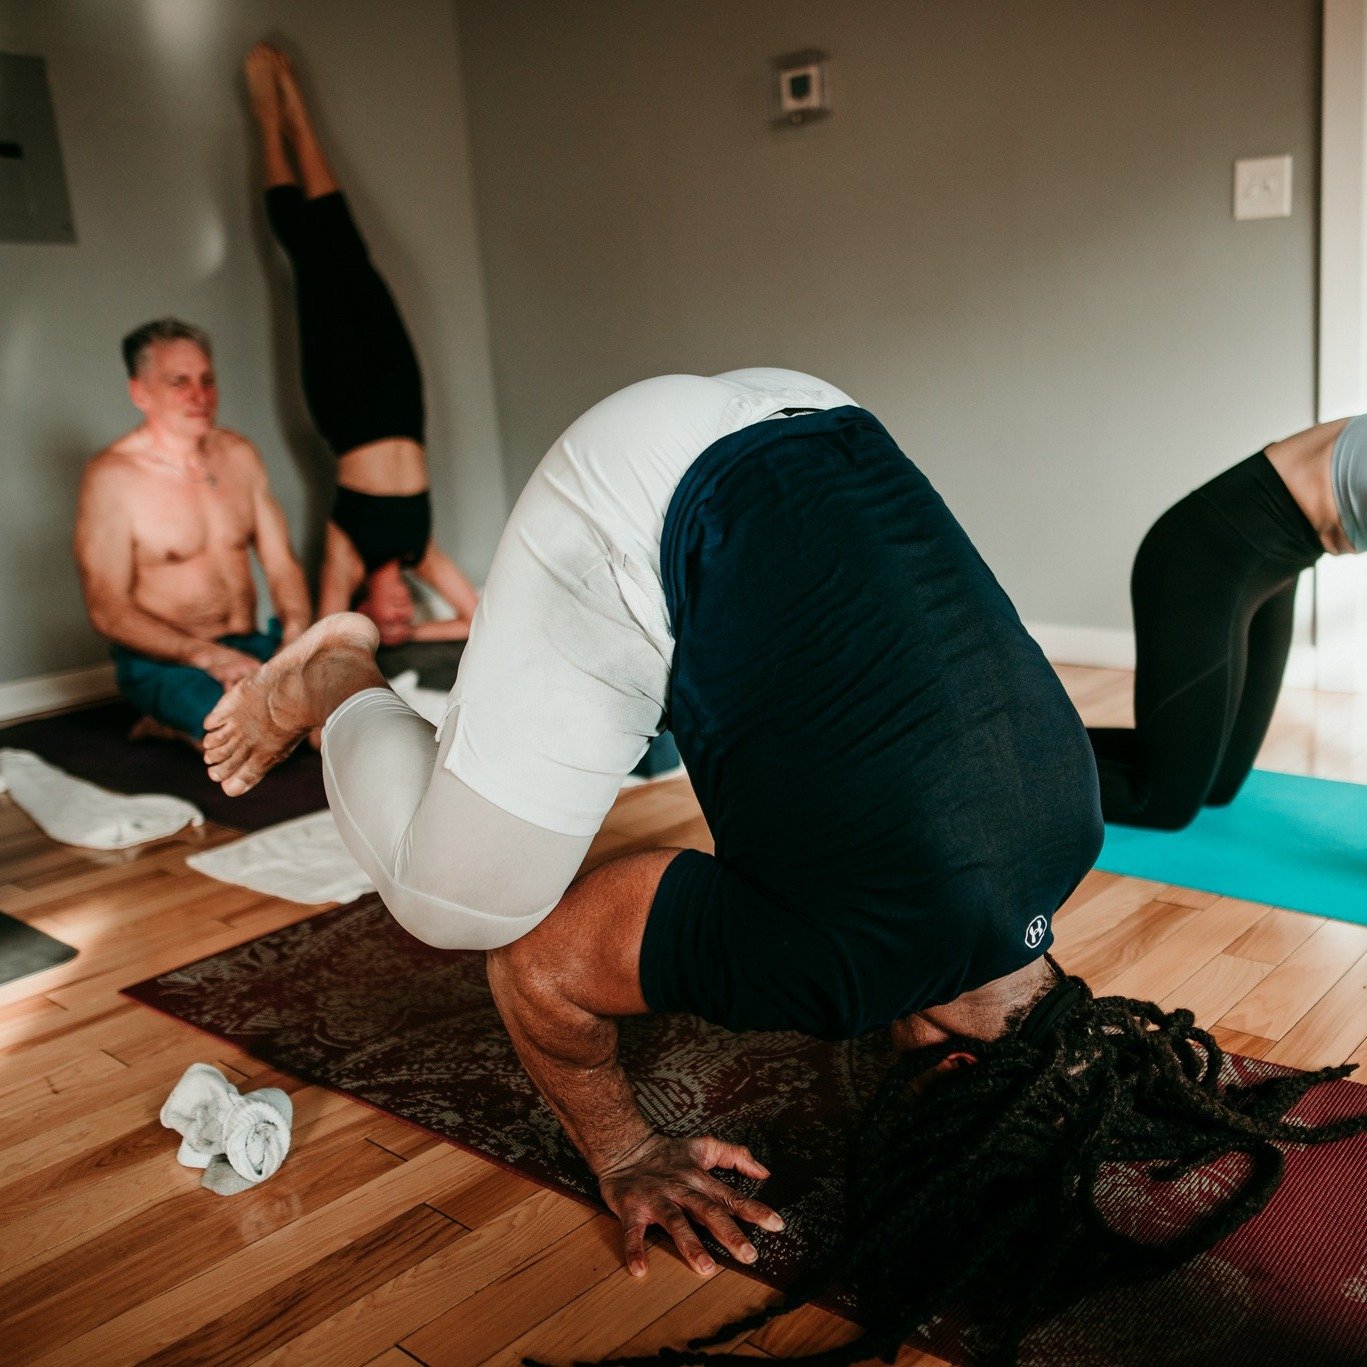 Diving into some upside-down yoga poses isn't just a fun challenge&mdash;it's a boost for your whole body! 🙃🧘&zwj;♀️ From pumping up your circulation to giving your immune system a little nudge, inversions are like a mini wellness vacation for your